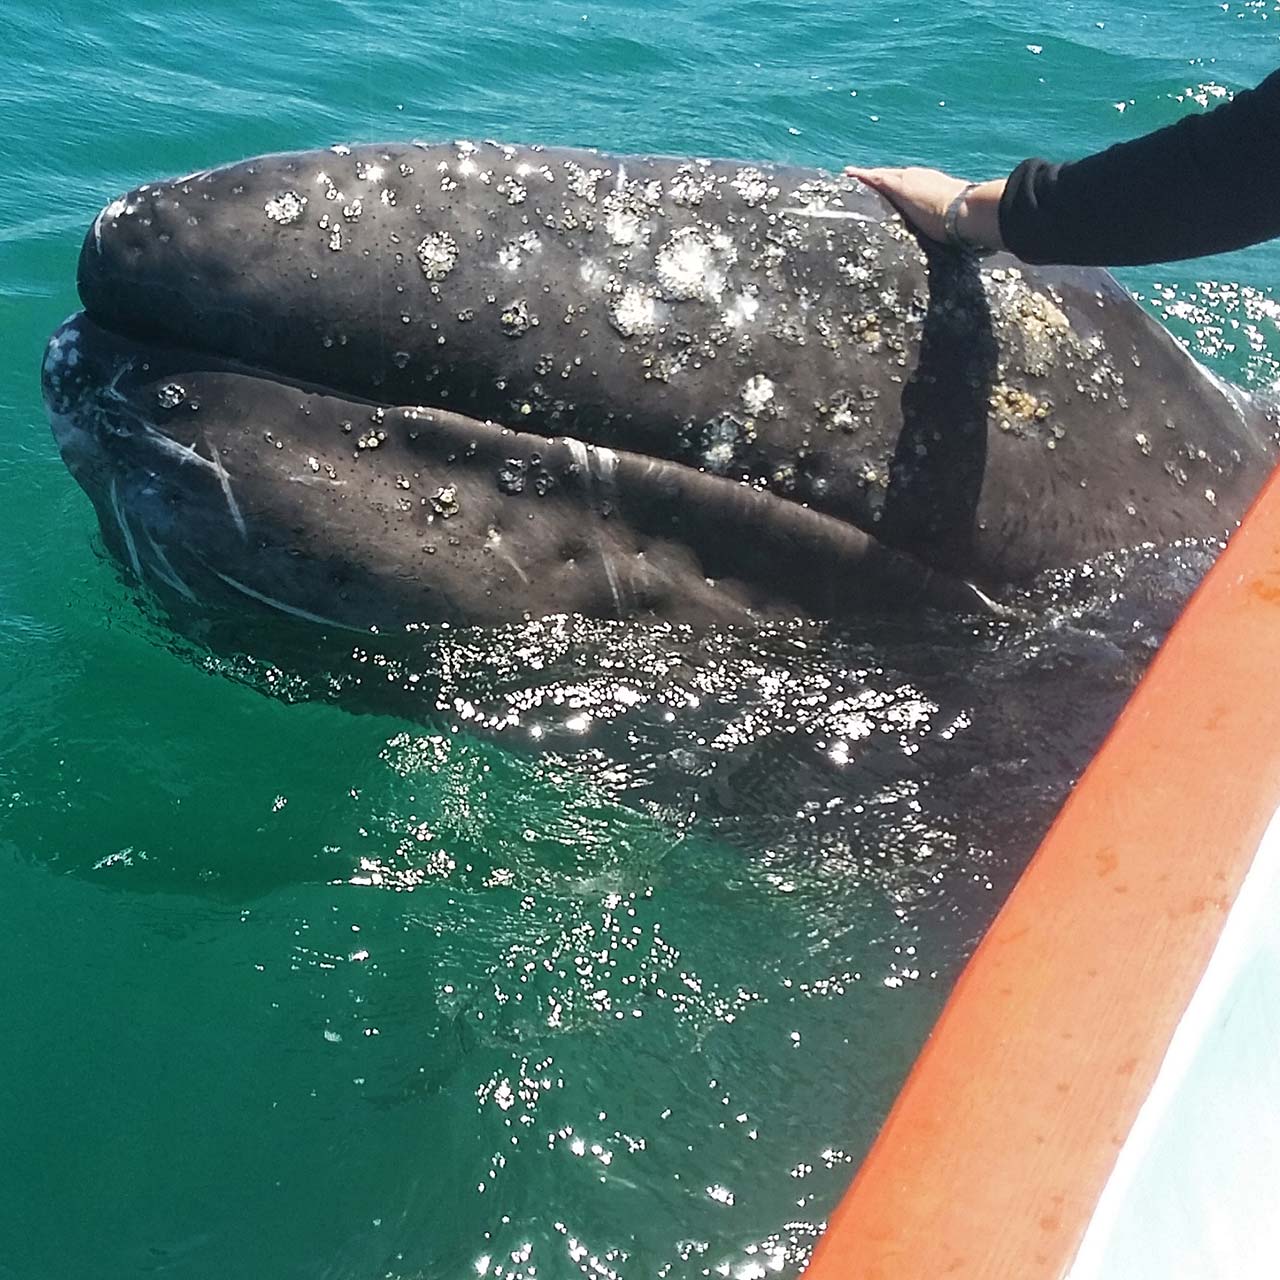 Petting a baby gray whale over the side of a small boat.